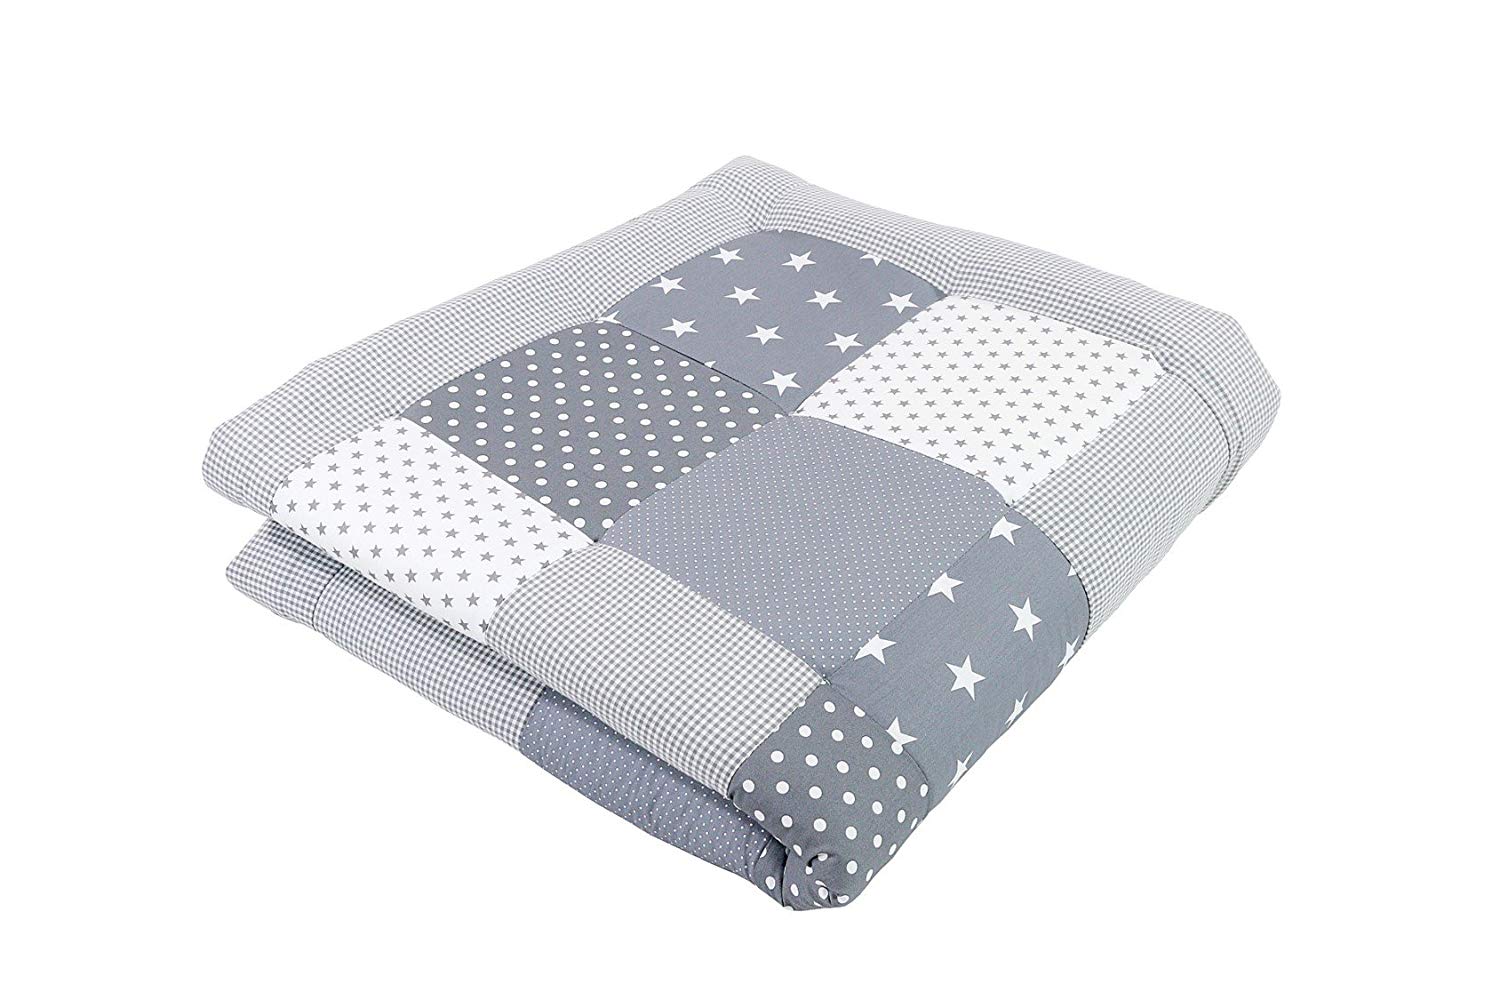 ULLENBOOM ® Crawling Blanket for Baby 80 x 80 cm Padded Grey Stars (Made in EU) - Baby Crawling Blanket with 100% Oeko-Tex® Cotton, Ideal as a Baby Blanket, Playpen Insert and Crawling Mat